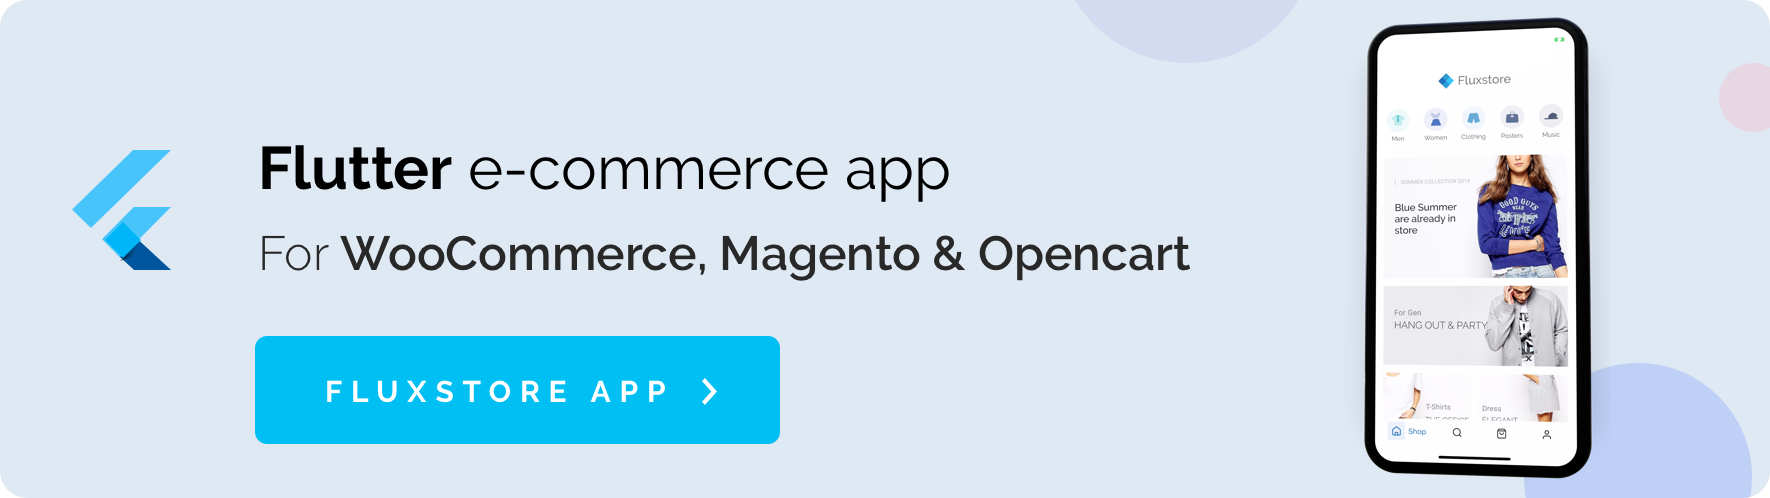 MStore Pro - Complete React Native template for e-commerce - 33